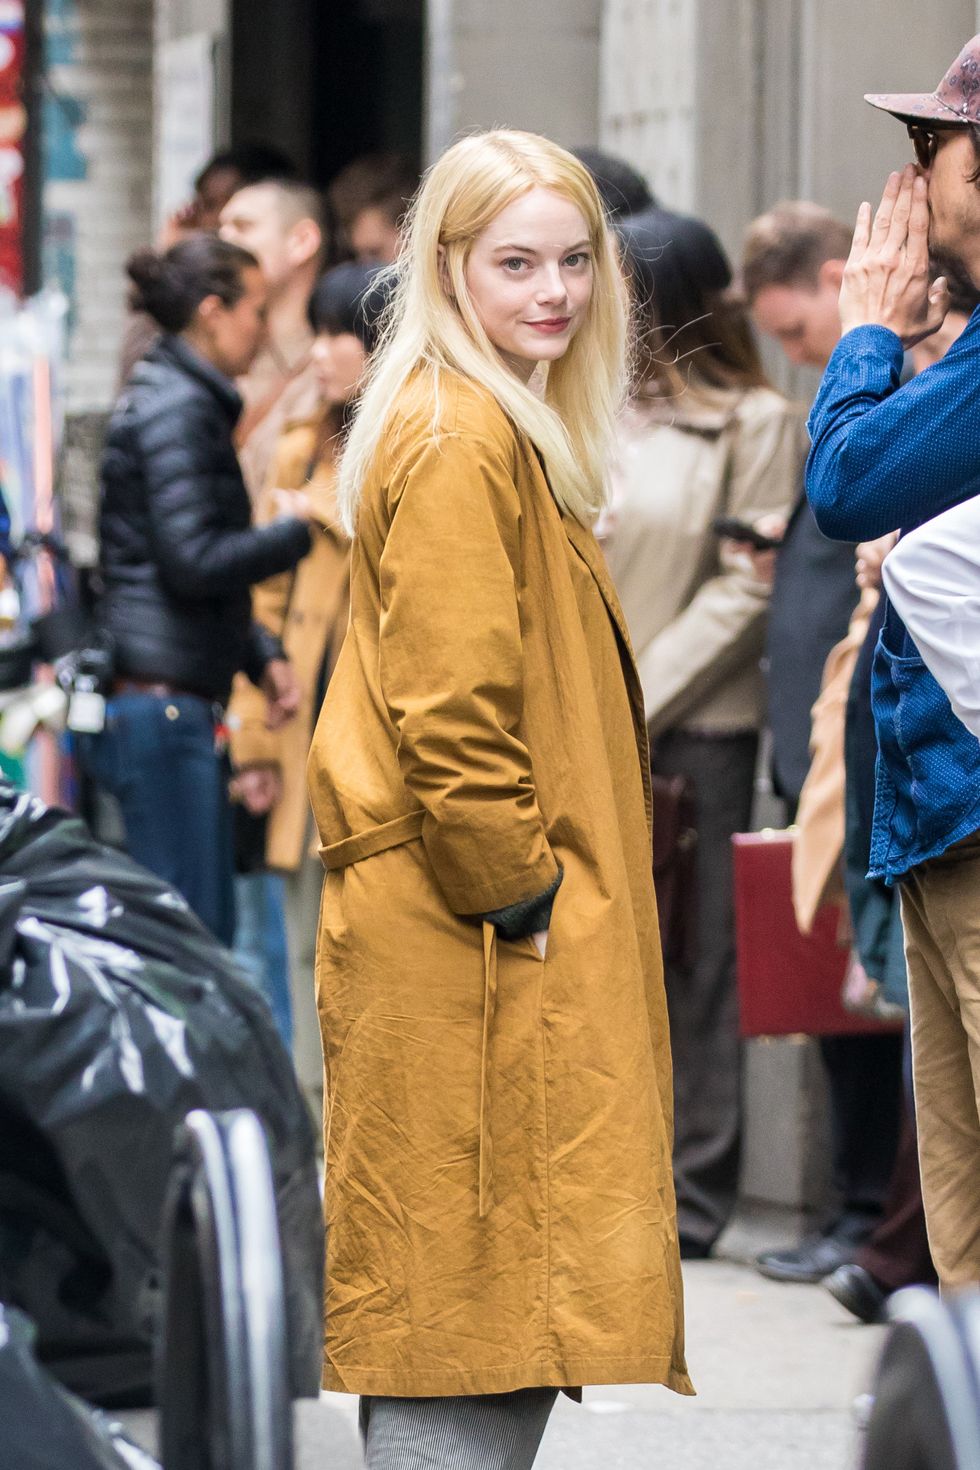 Hair, Street fashion, Clothing, Fashion, Coat, Blond, Outerwear, Yellow, Hairstyle, Trench coat, 